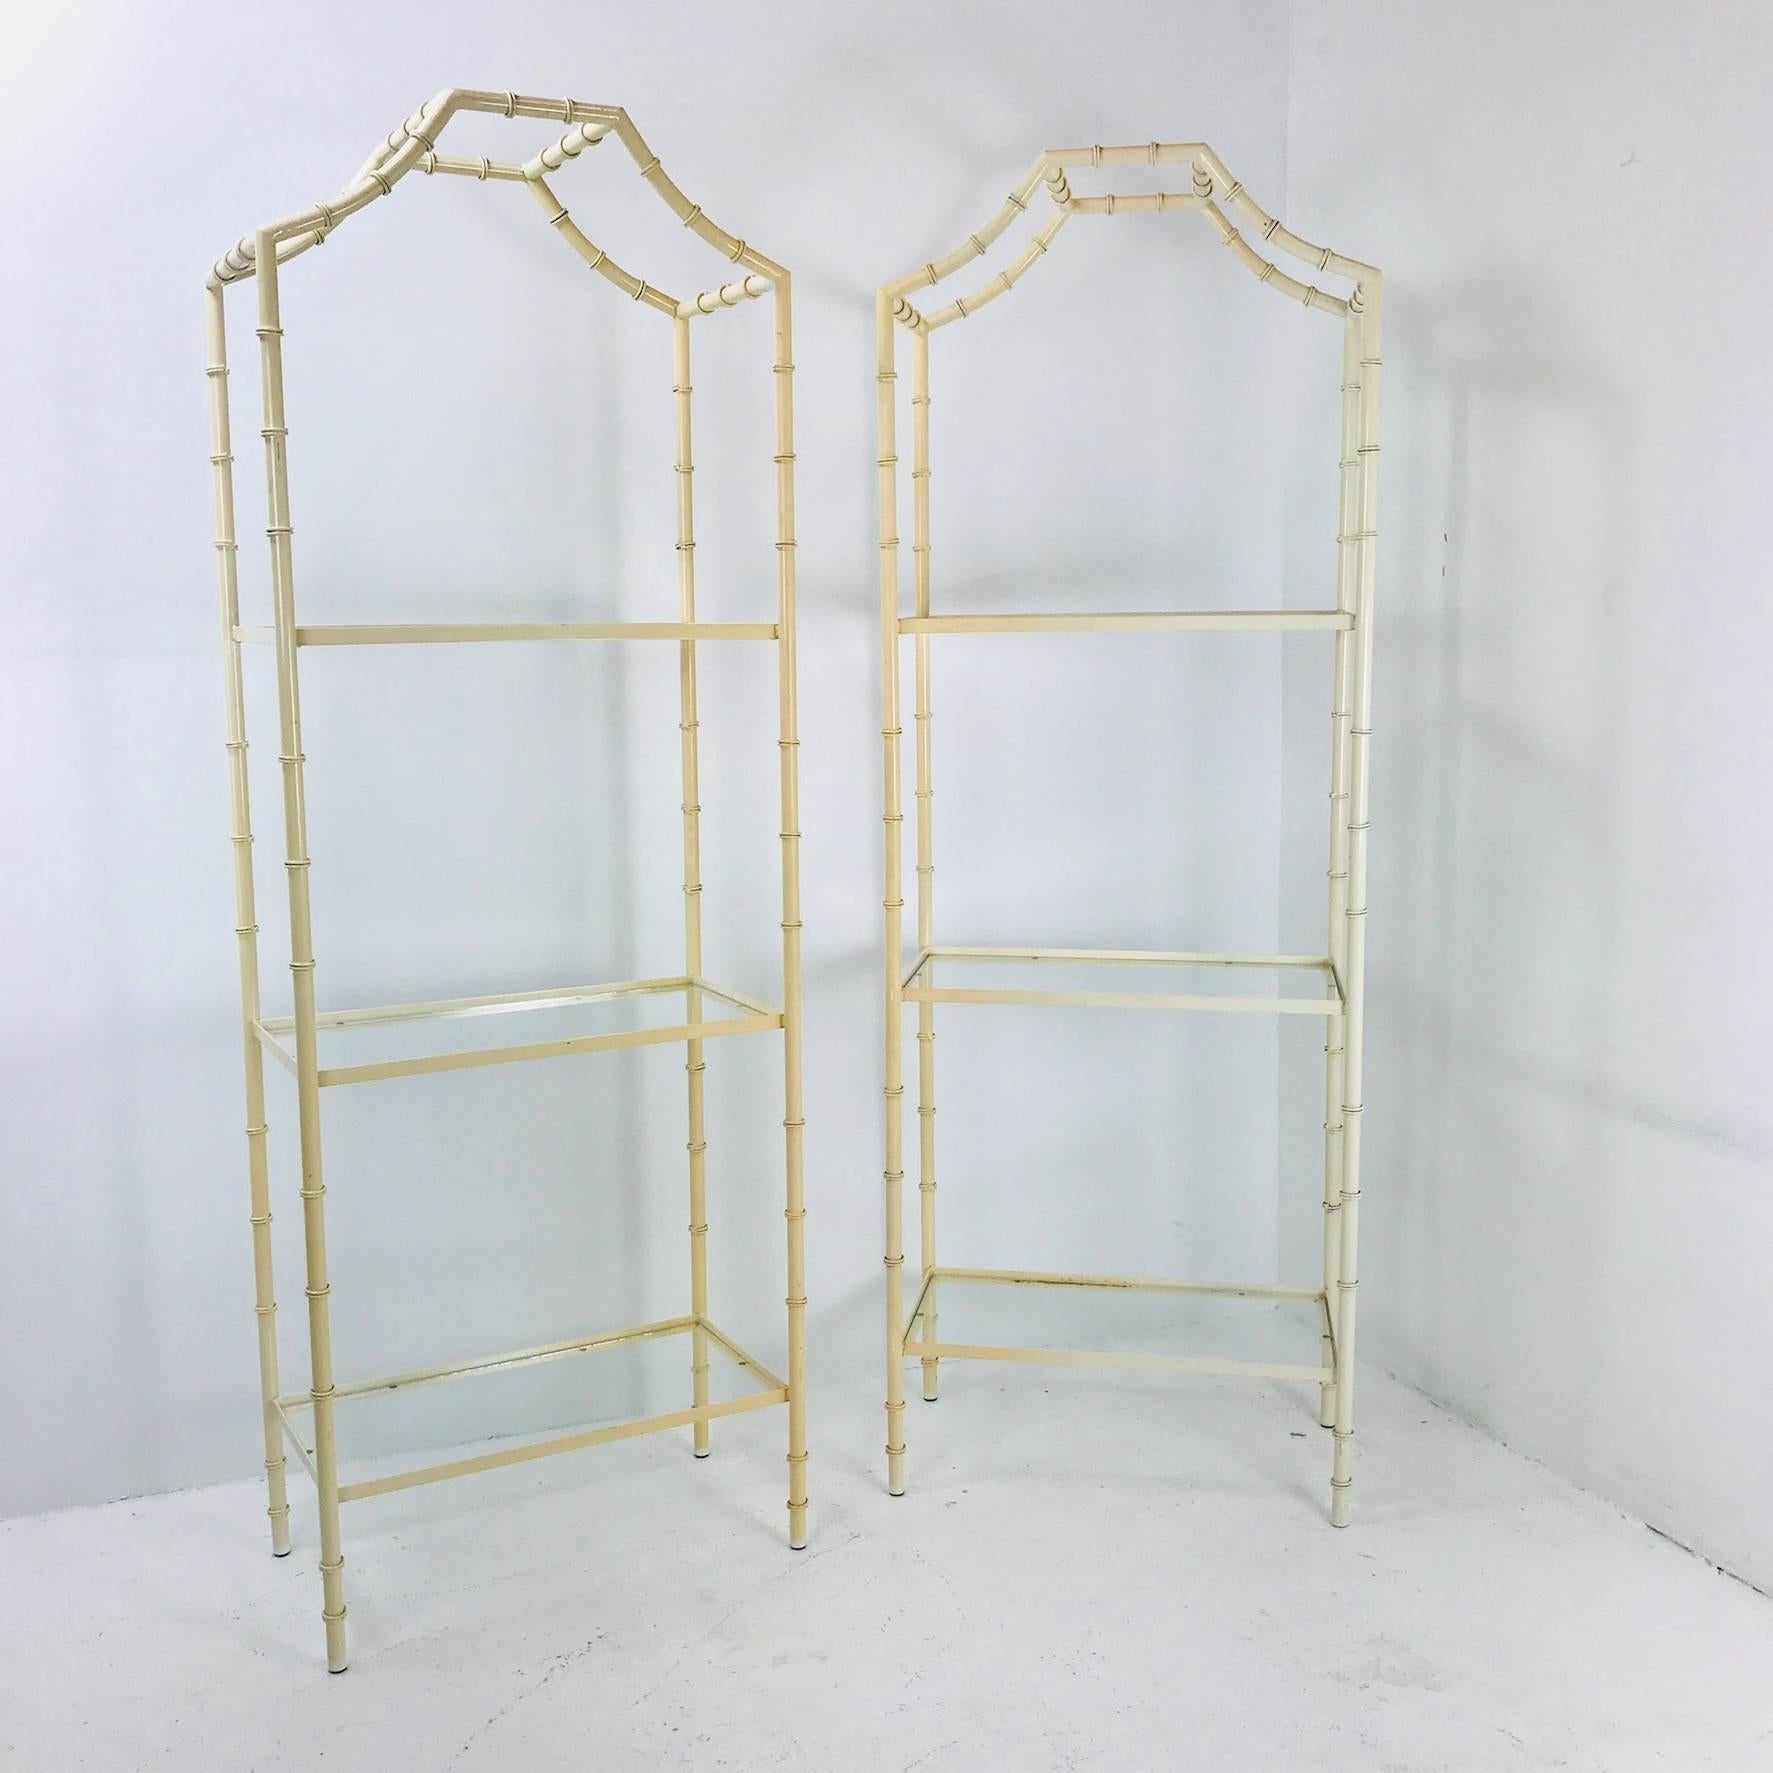 20th Century Pair of Lacquered Faux Bamboo Étagères with Glass Shelves